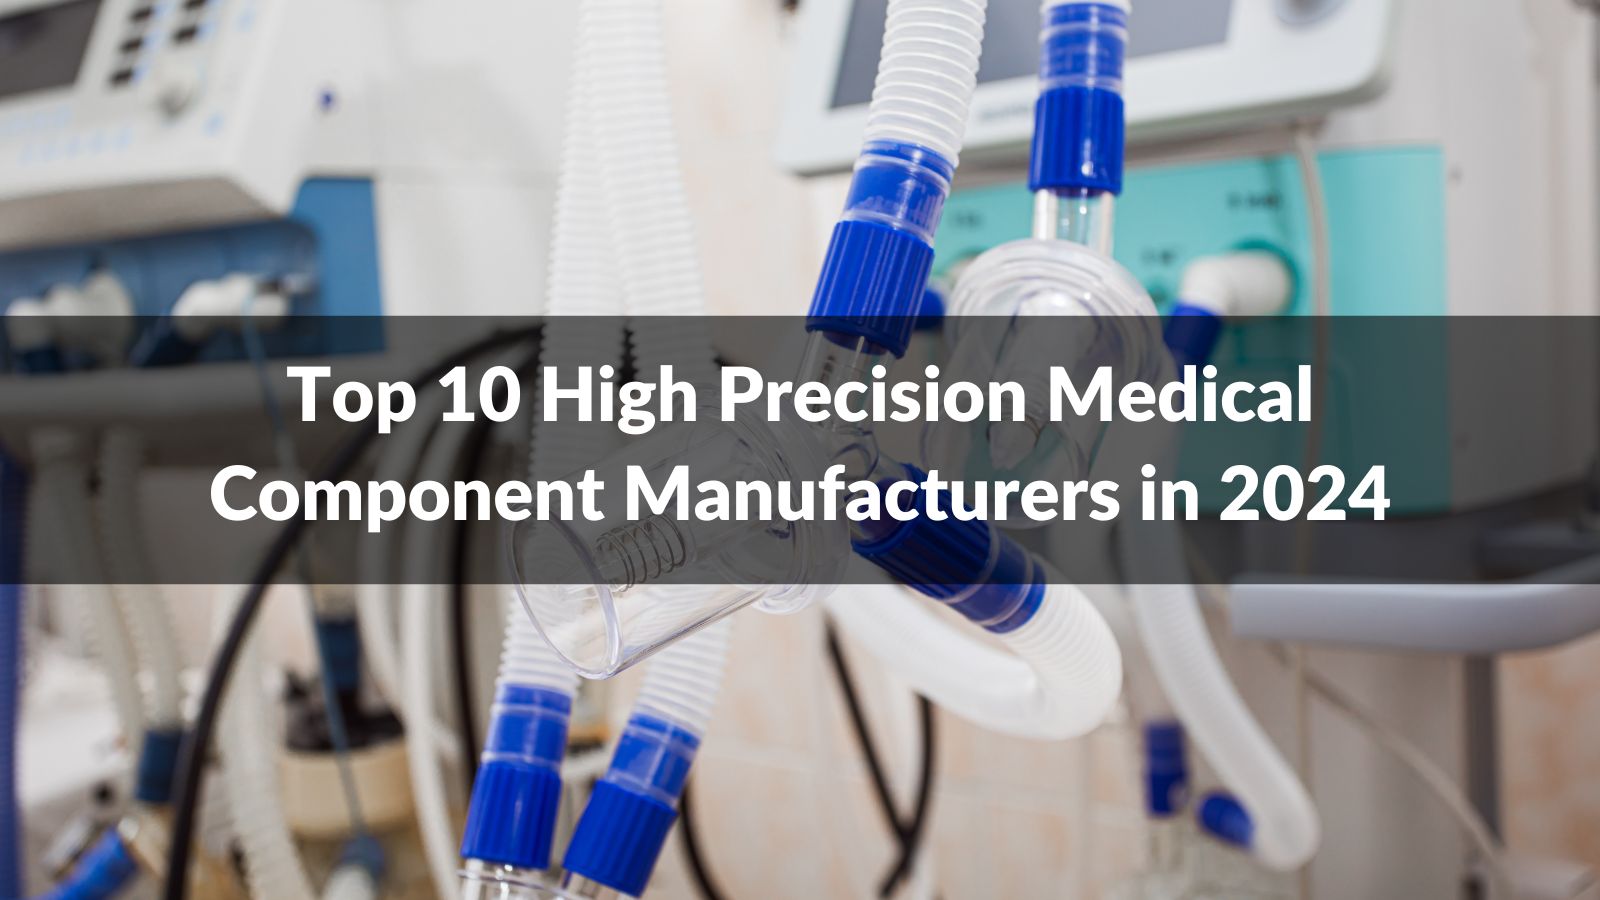 Top 10 High Precision Medical Component Manufacturers in 2024